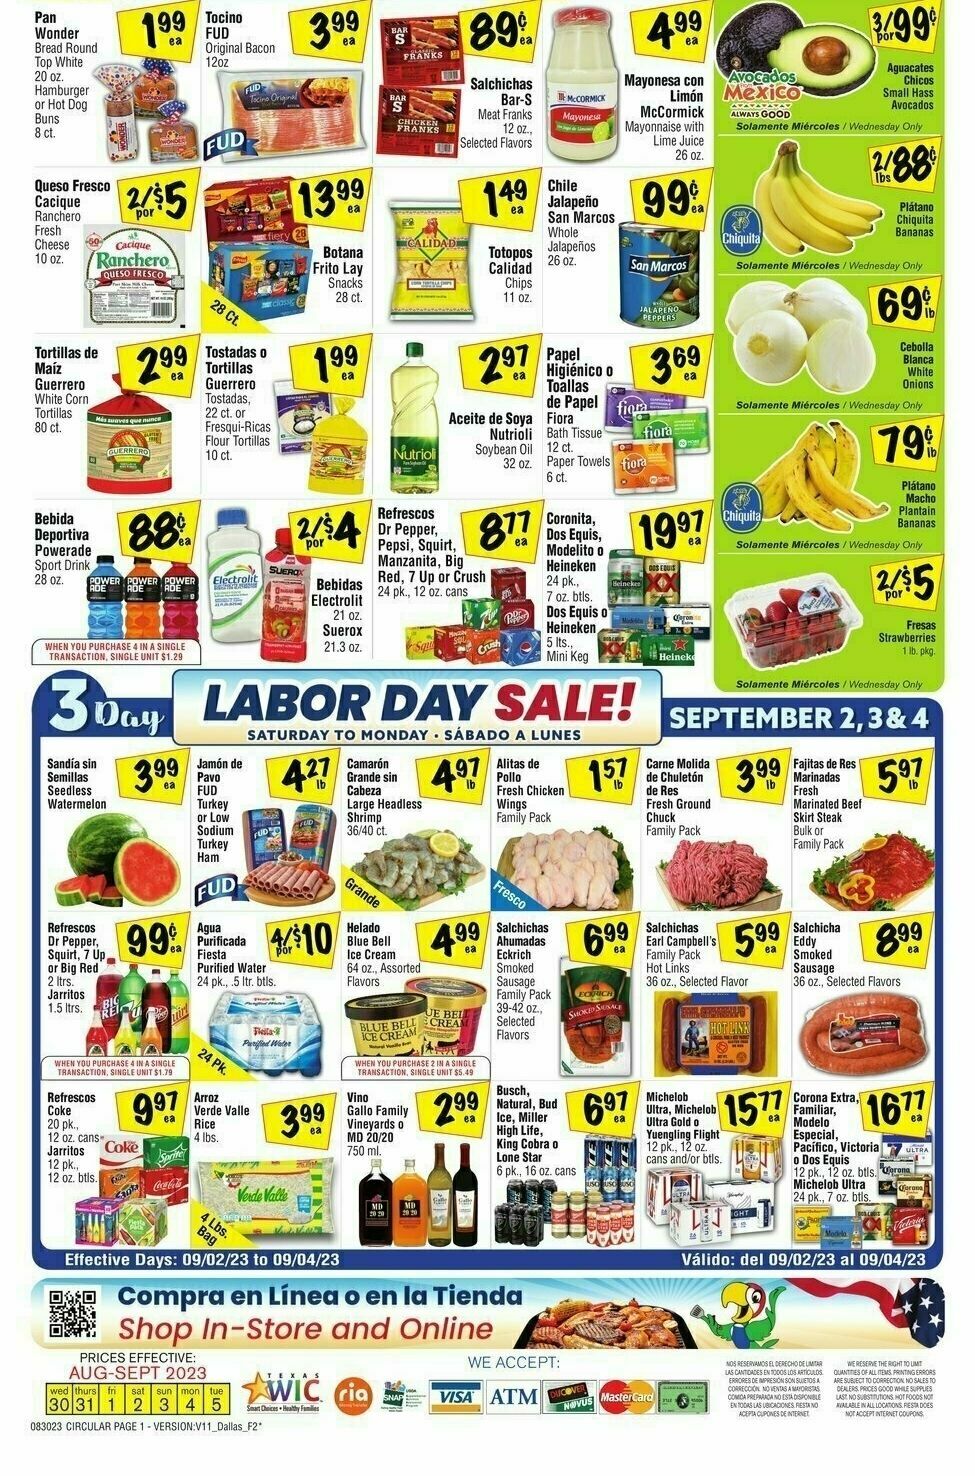 Fiesta Mart Weekly Ad from August 30